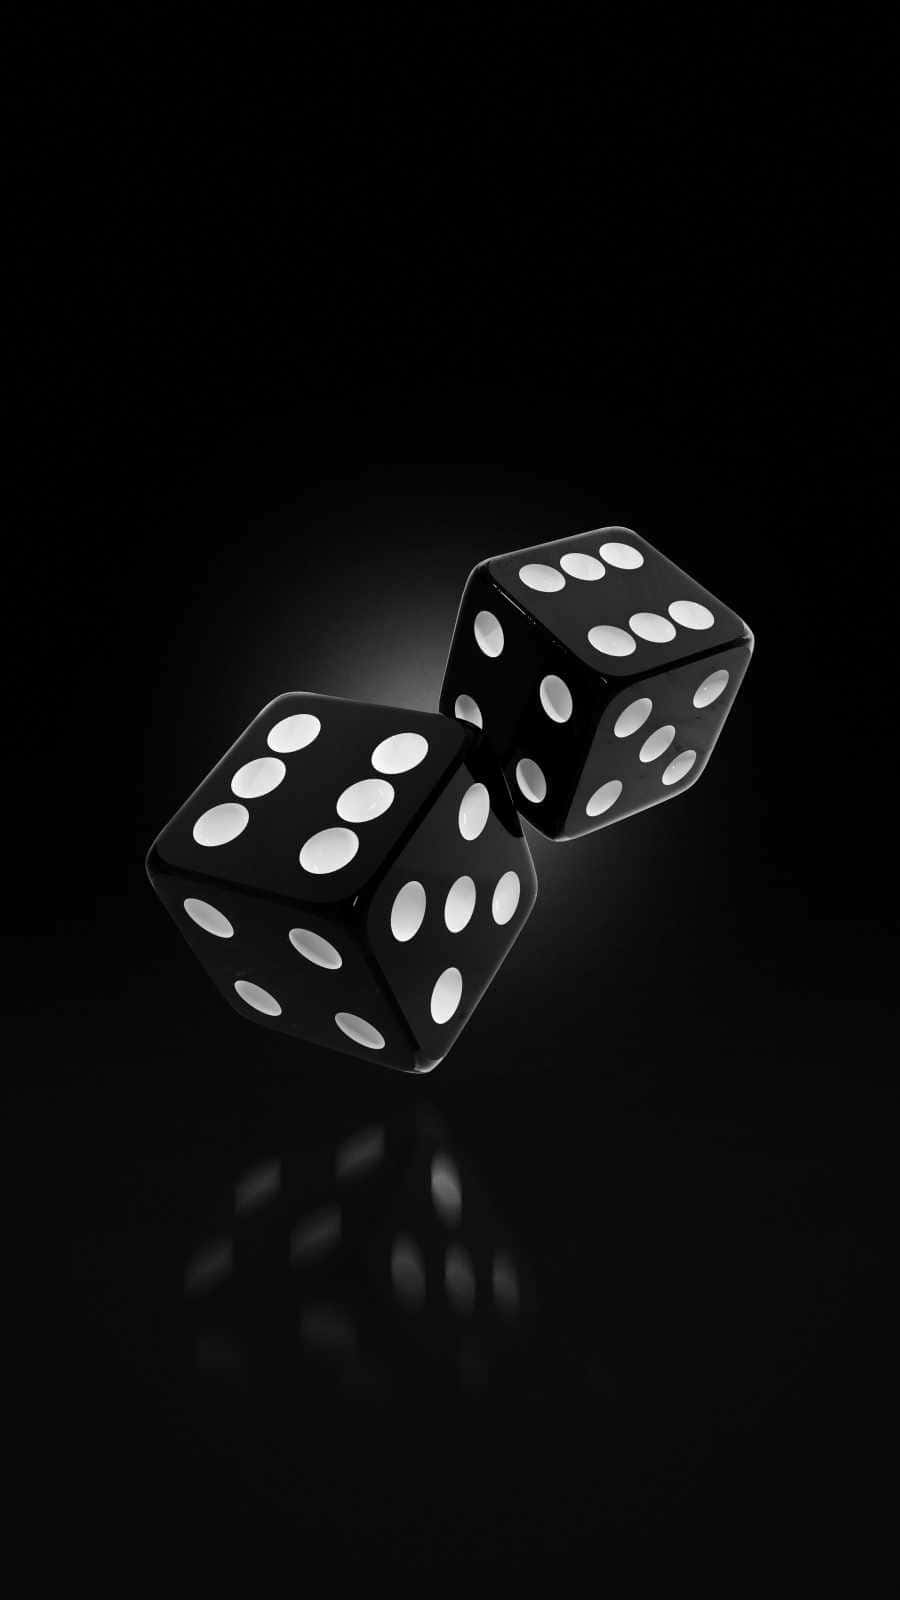 Two Black Dice On A Black Background